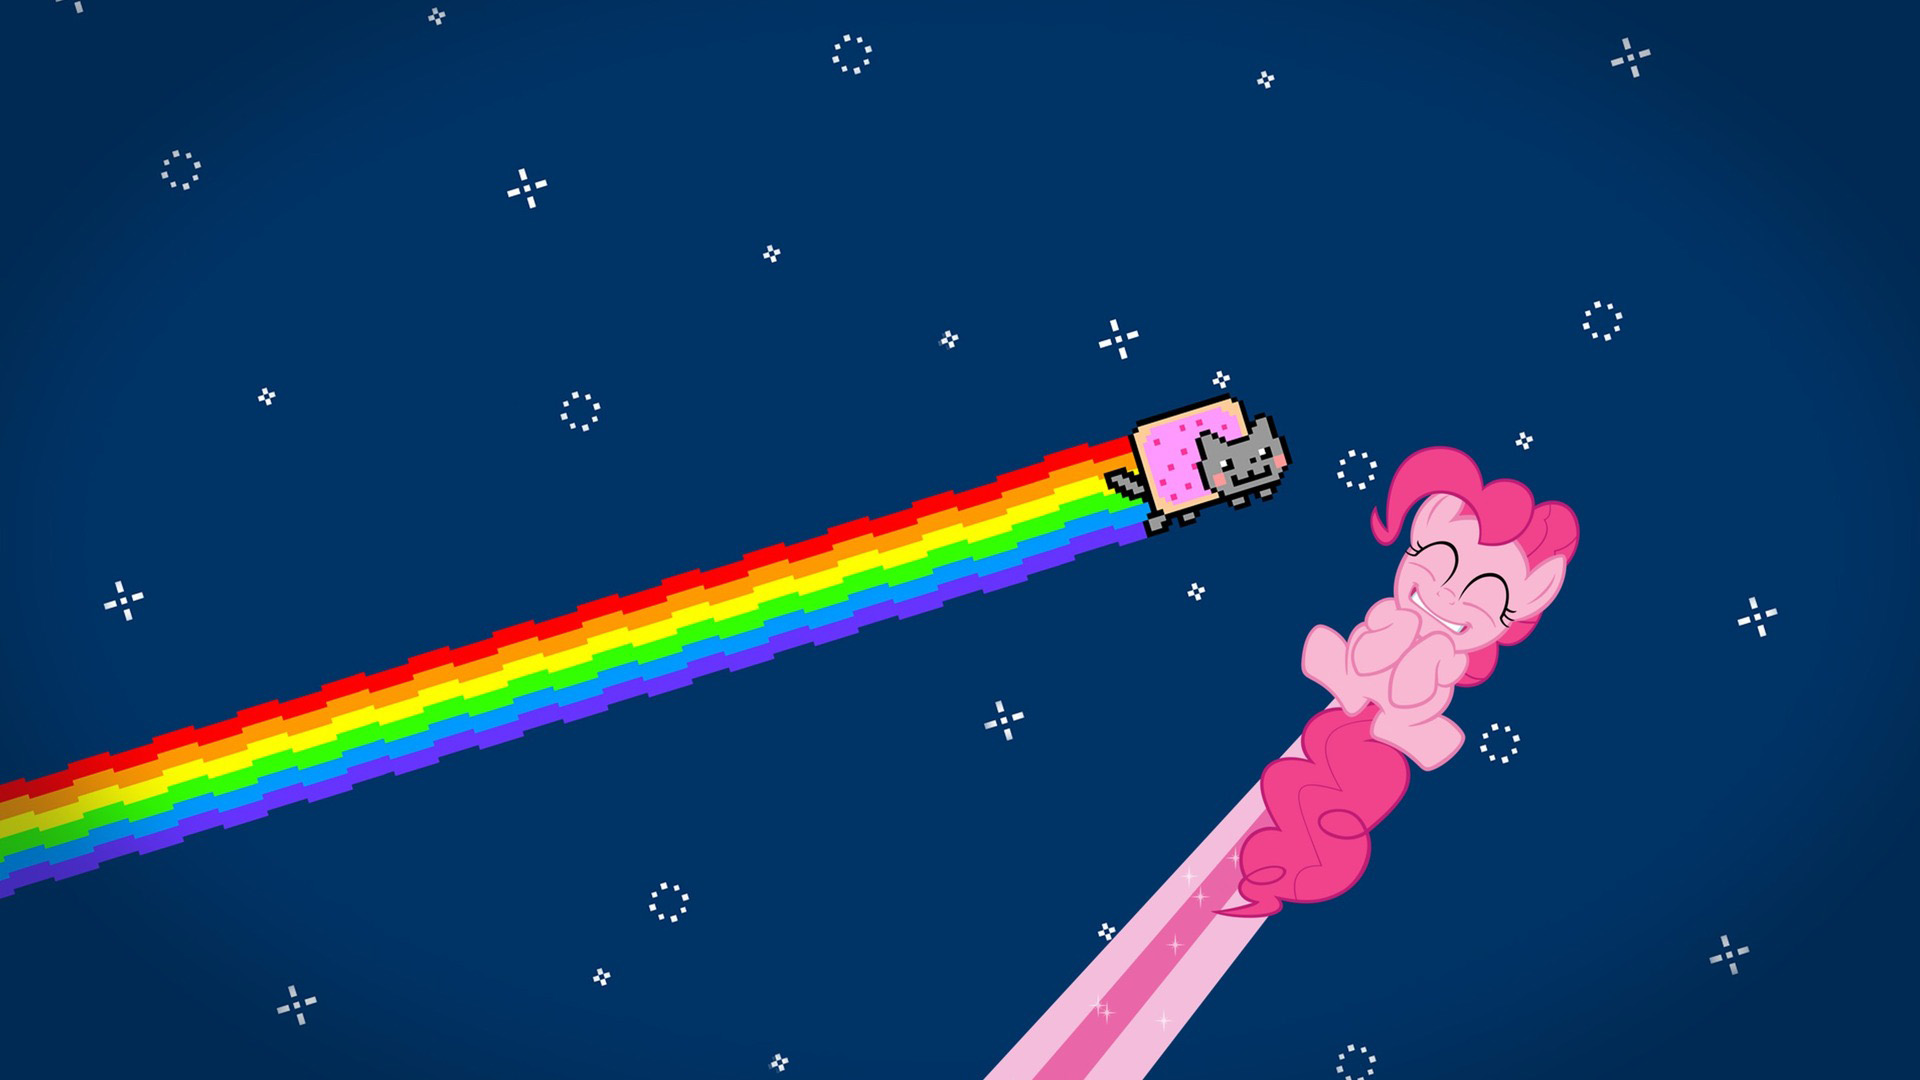 cat, rainbow, star, pinky pie, animated wallpaper picture